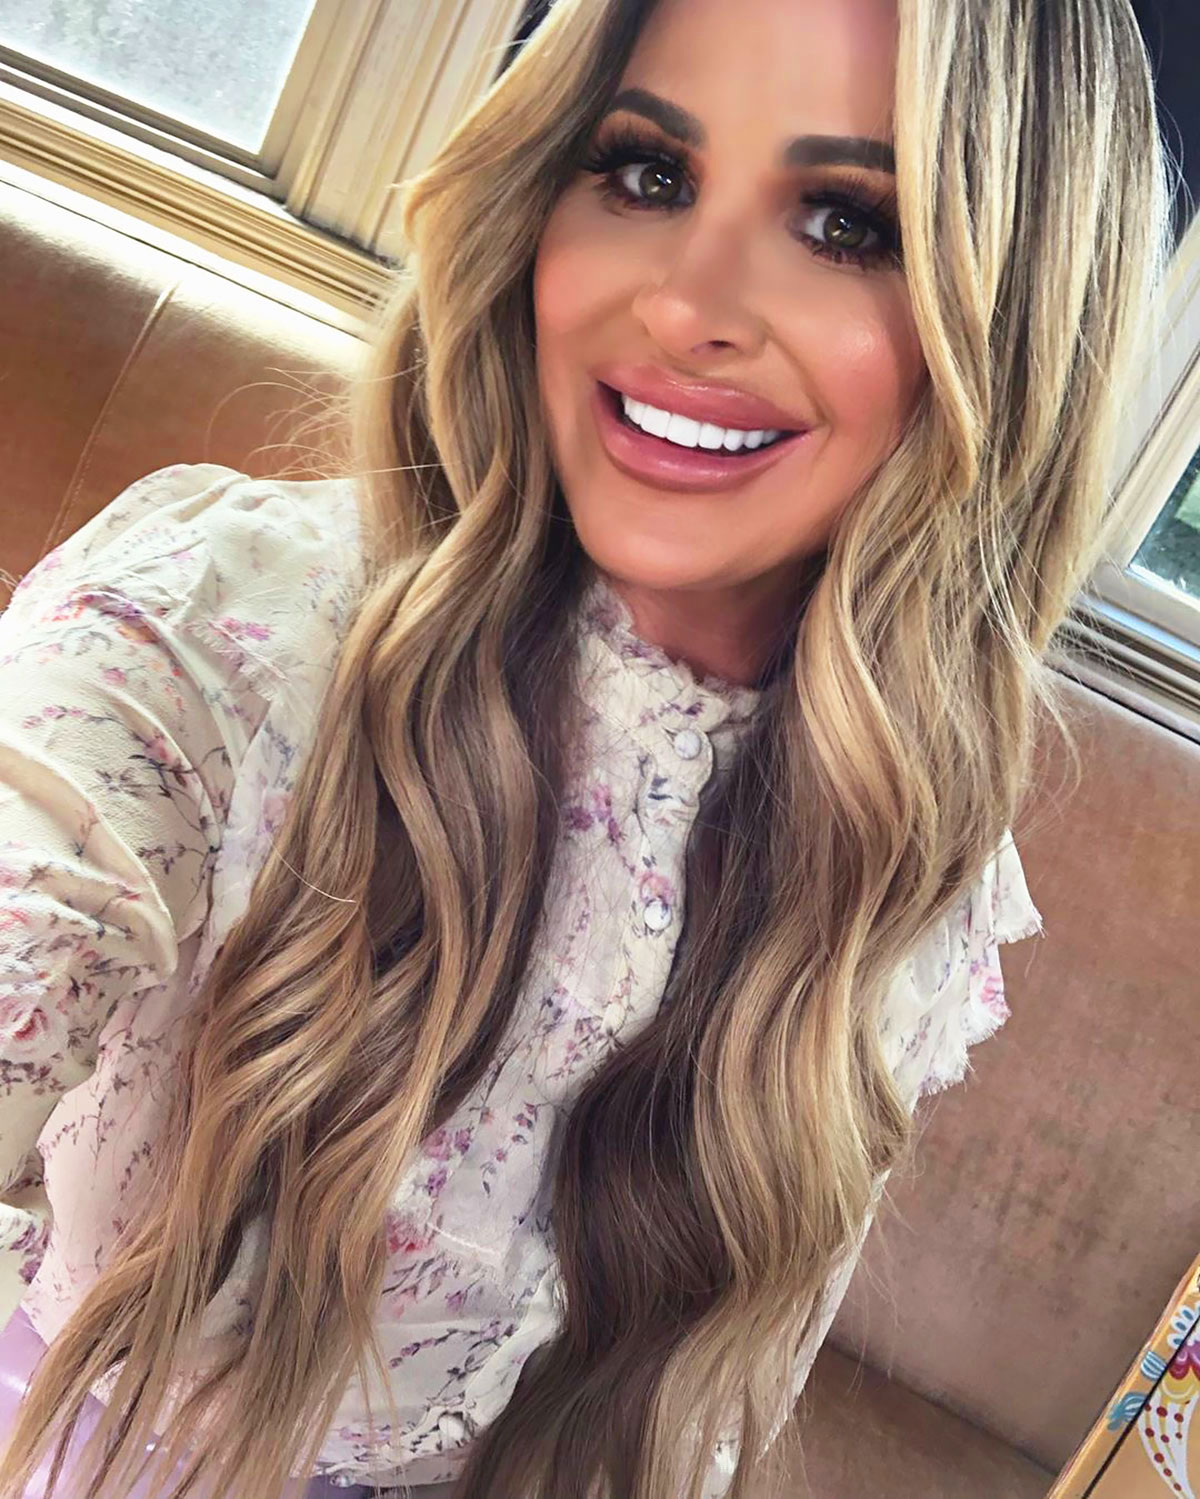 Kim Zolciak Claps Back At Critic For Photoshop Allegations